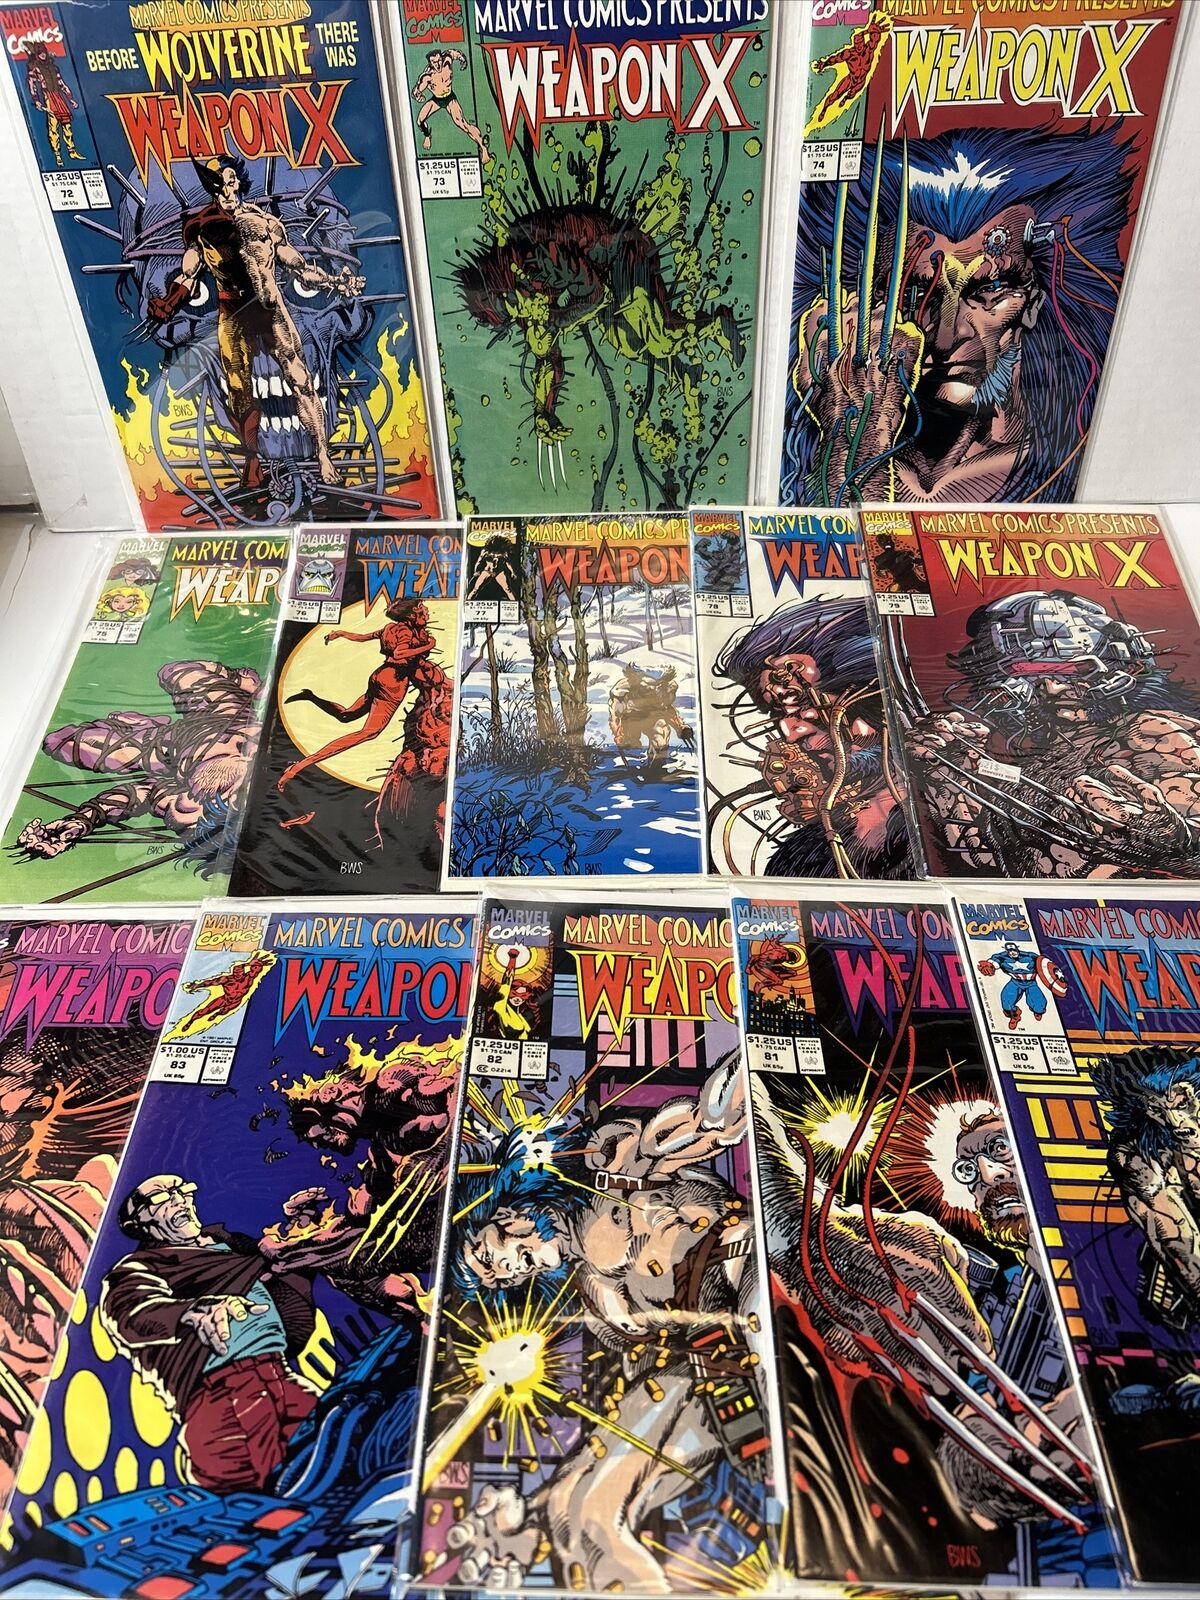 Marvel Comics Presents #72-84. Complete Barry Windsor Smith Weapon X Complete